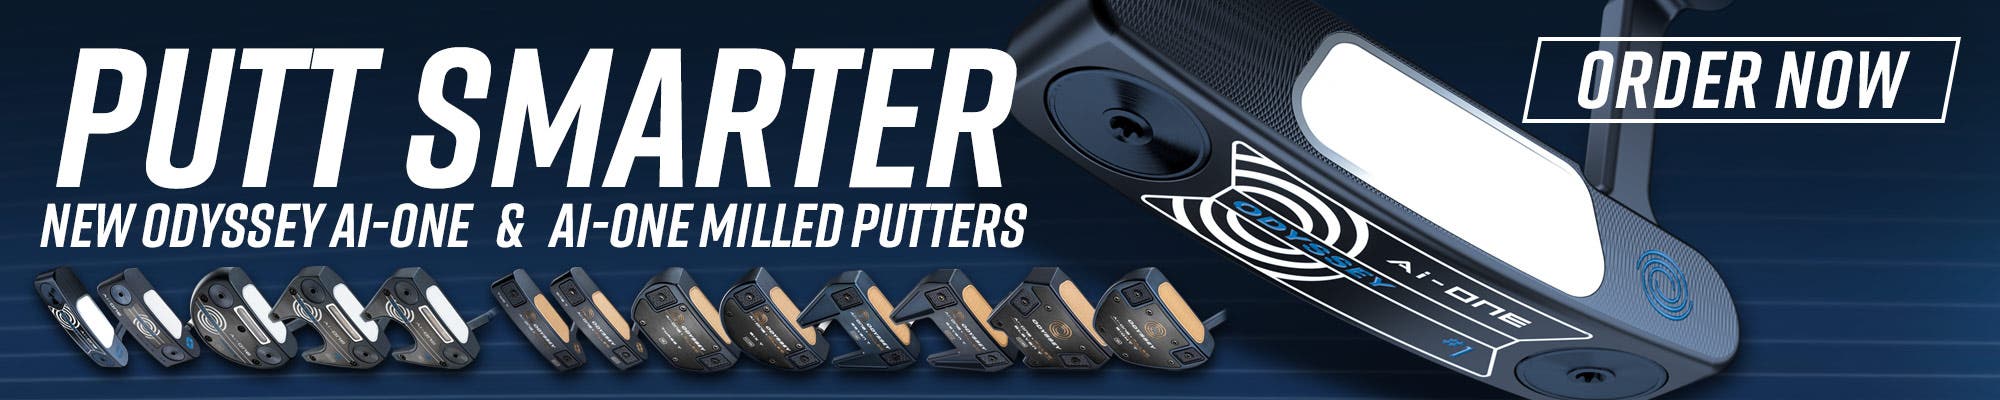 Putt Smarter | New Odyssey Ai-One + Ai-One Milled Putters | Pre-Order Now | 13 Models